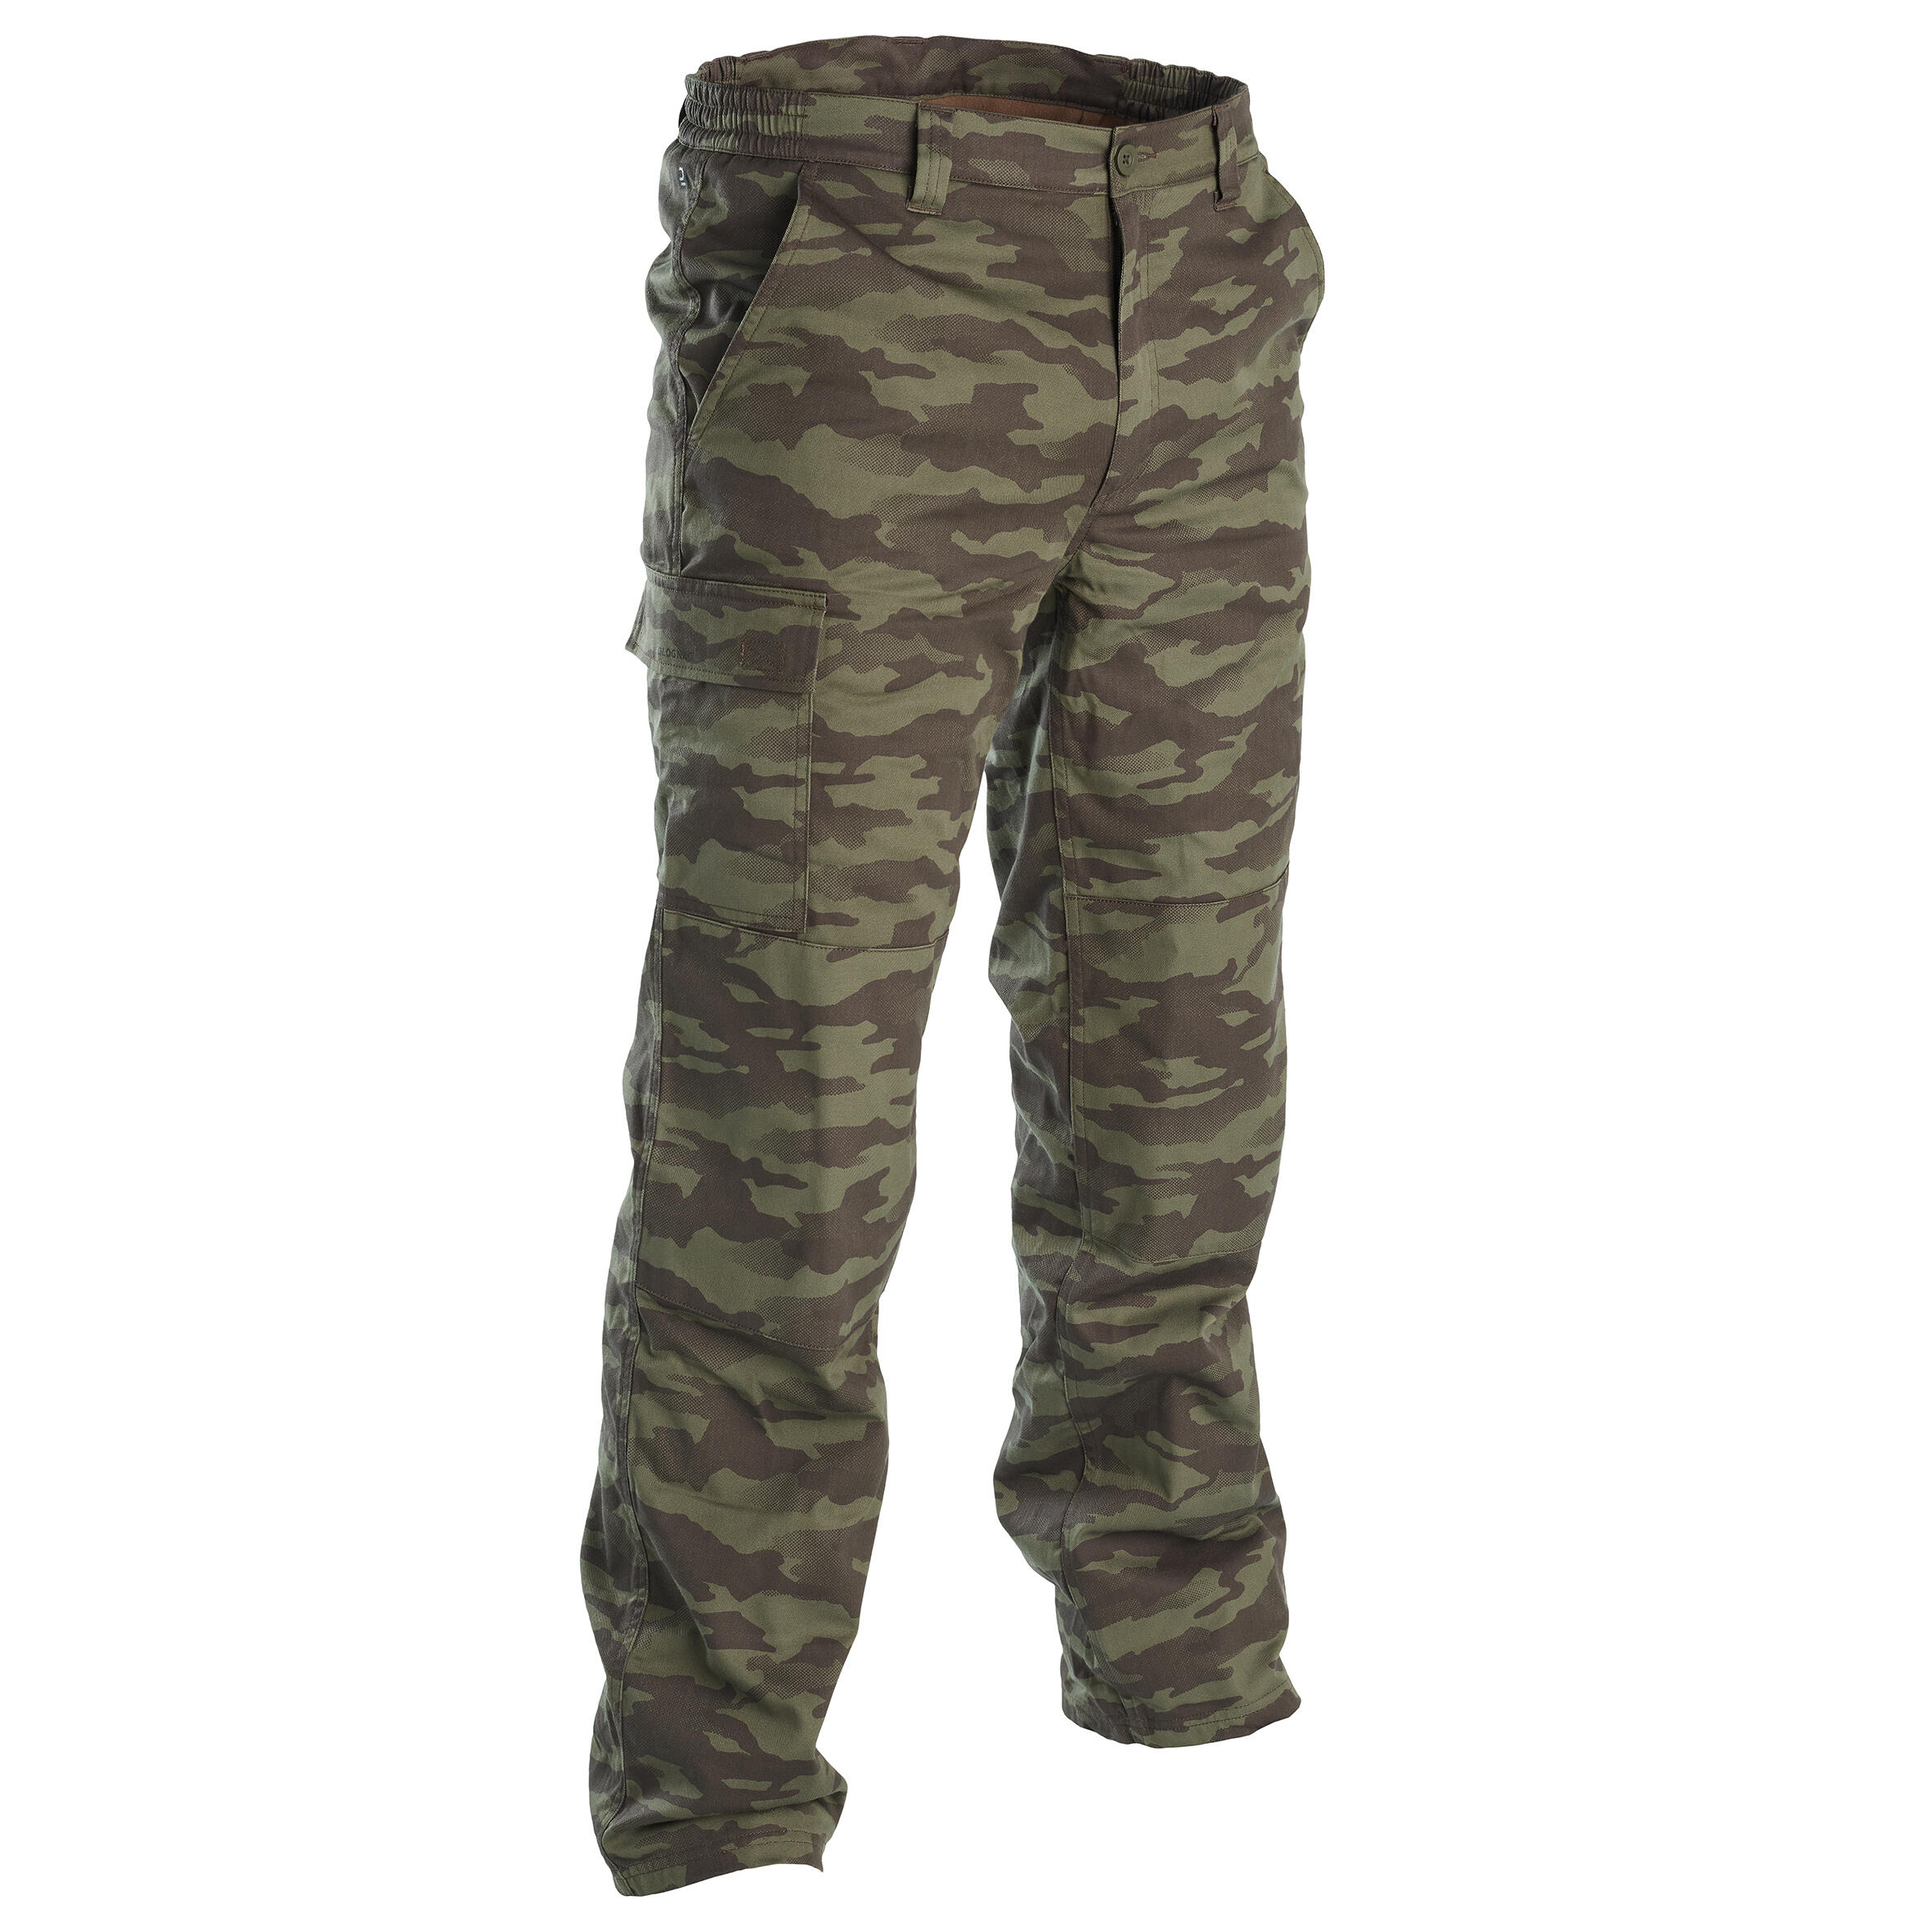 Mens Camouflage Trousers Manufacturer Supplier from Delhi India